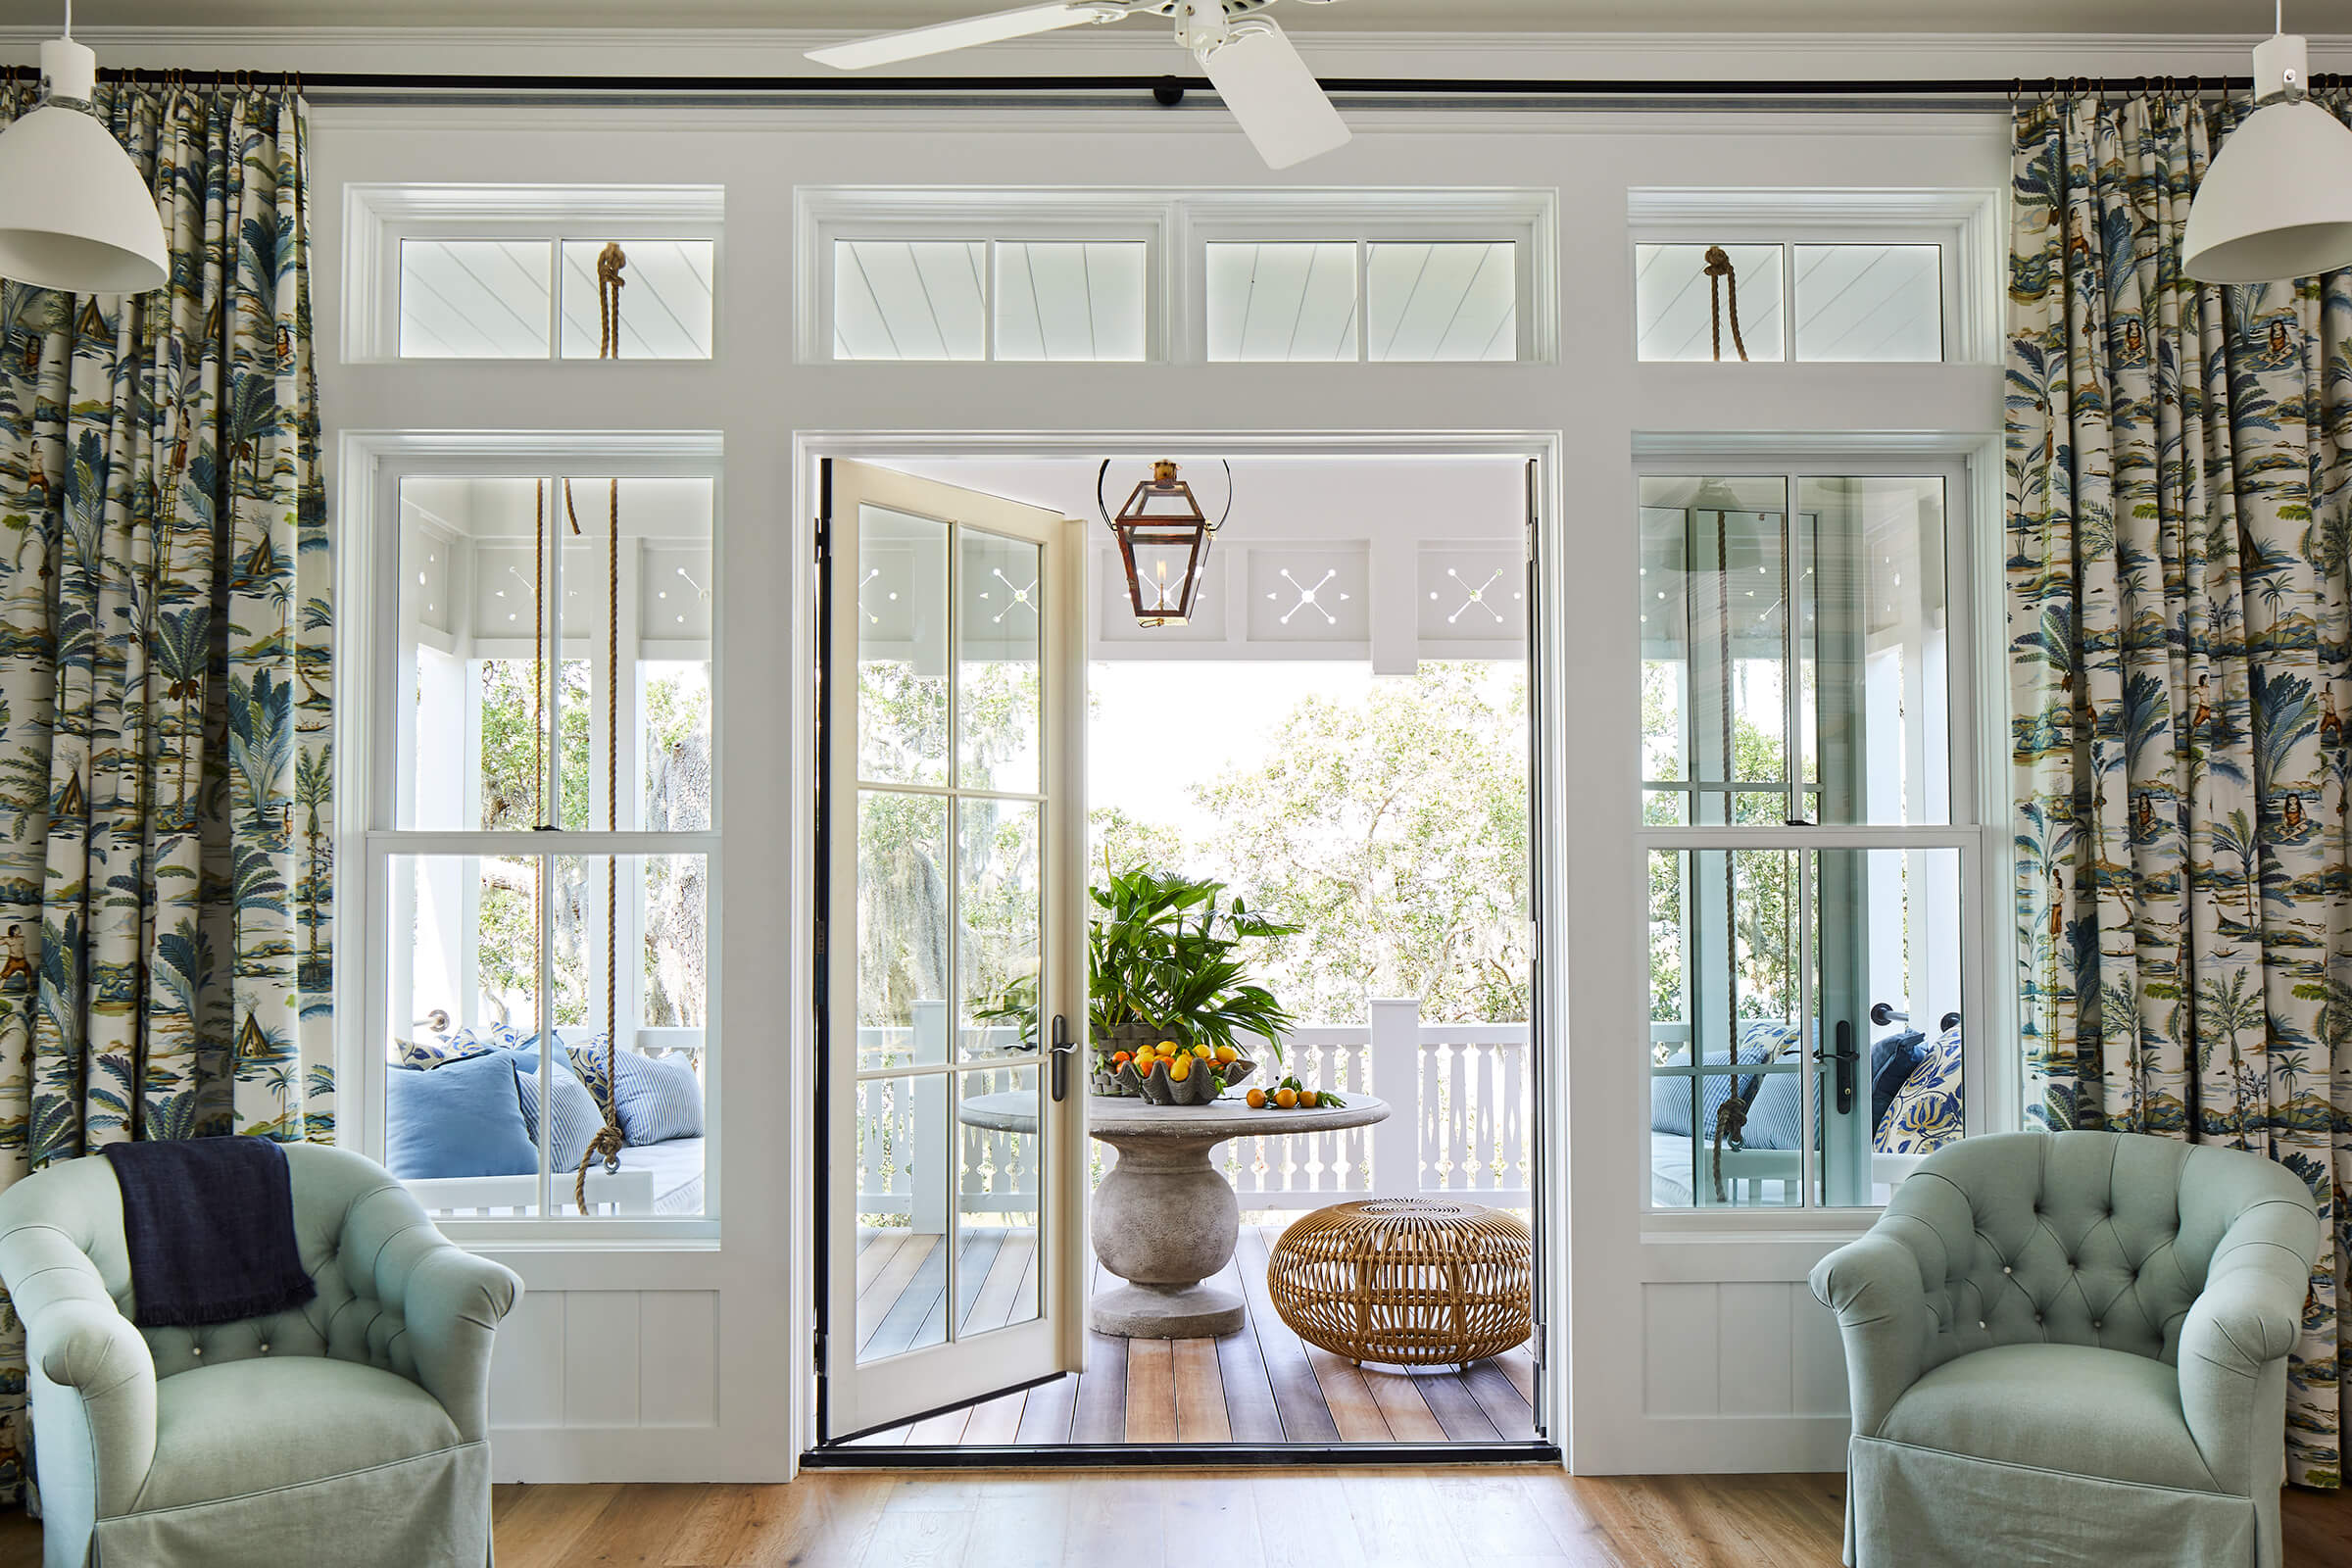 Inside 2019 Southern Living Showhouse looking out to the porch through Marvin French doors.